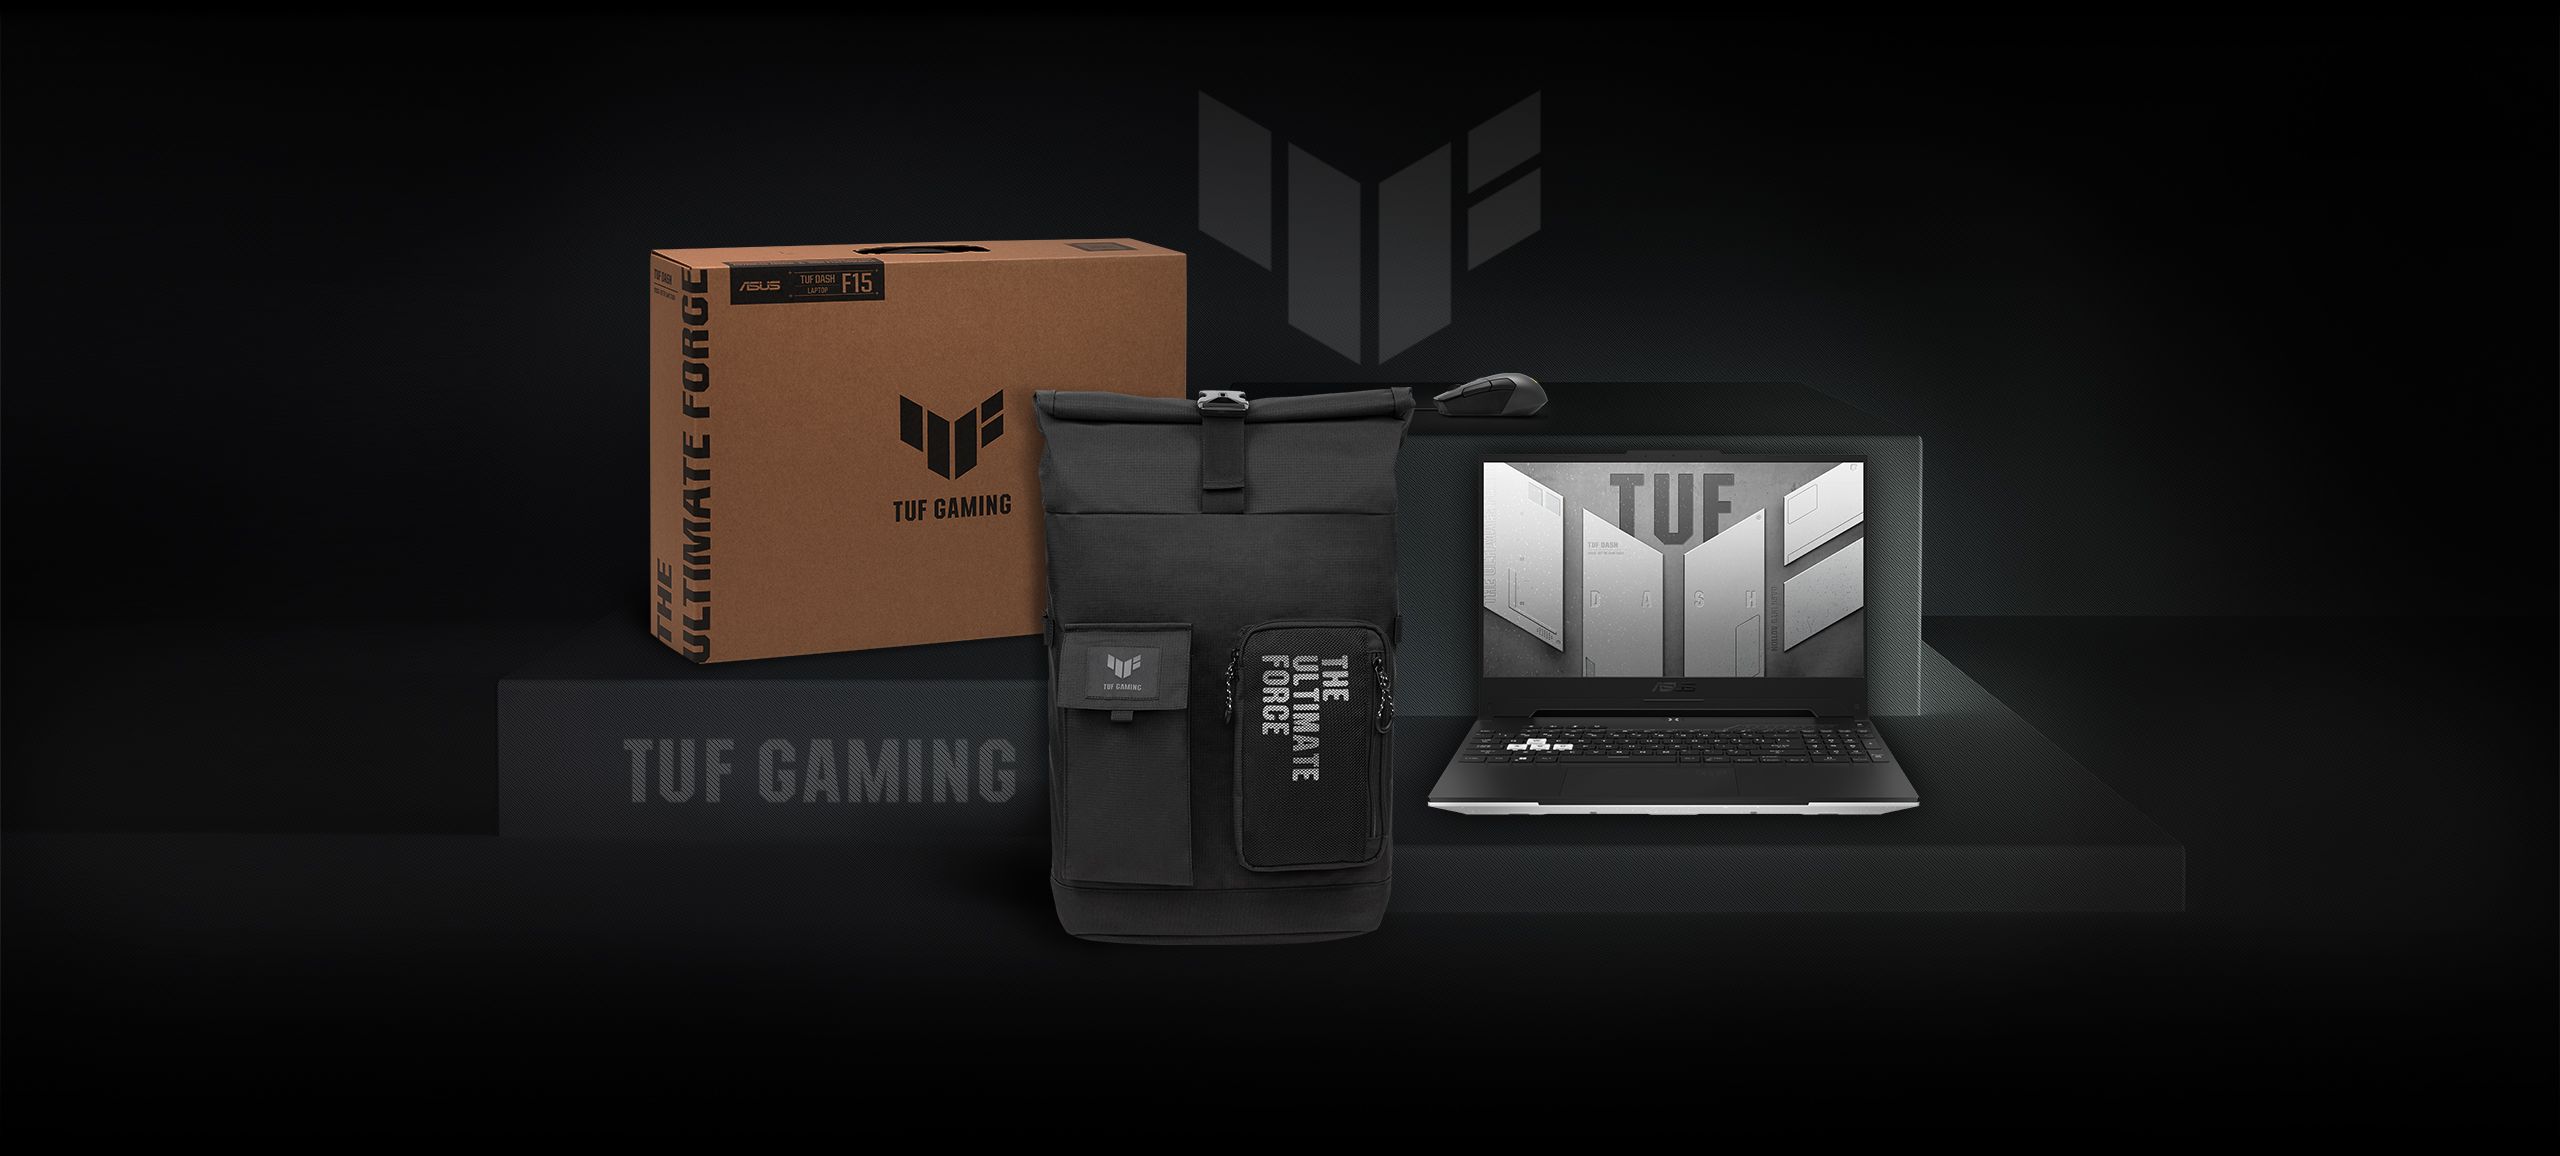 The image shows the Tuf box, Tuf backpack and the mouse of Tuf Gaming M5 on bundle section